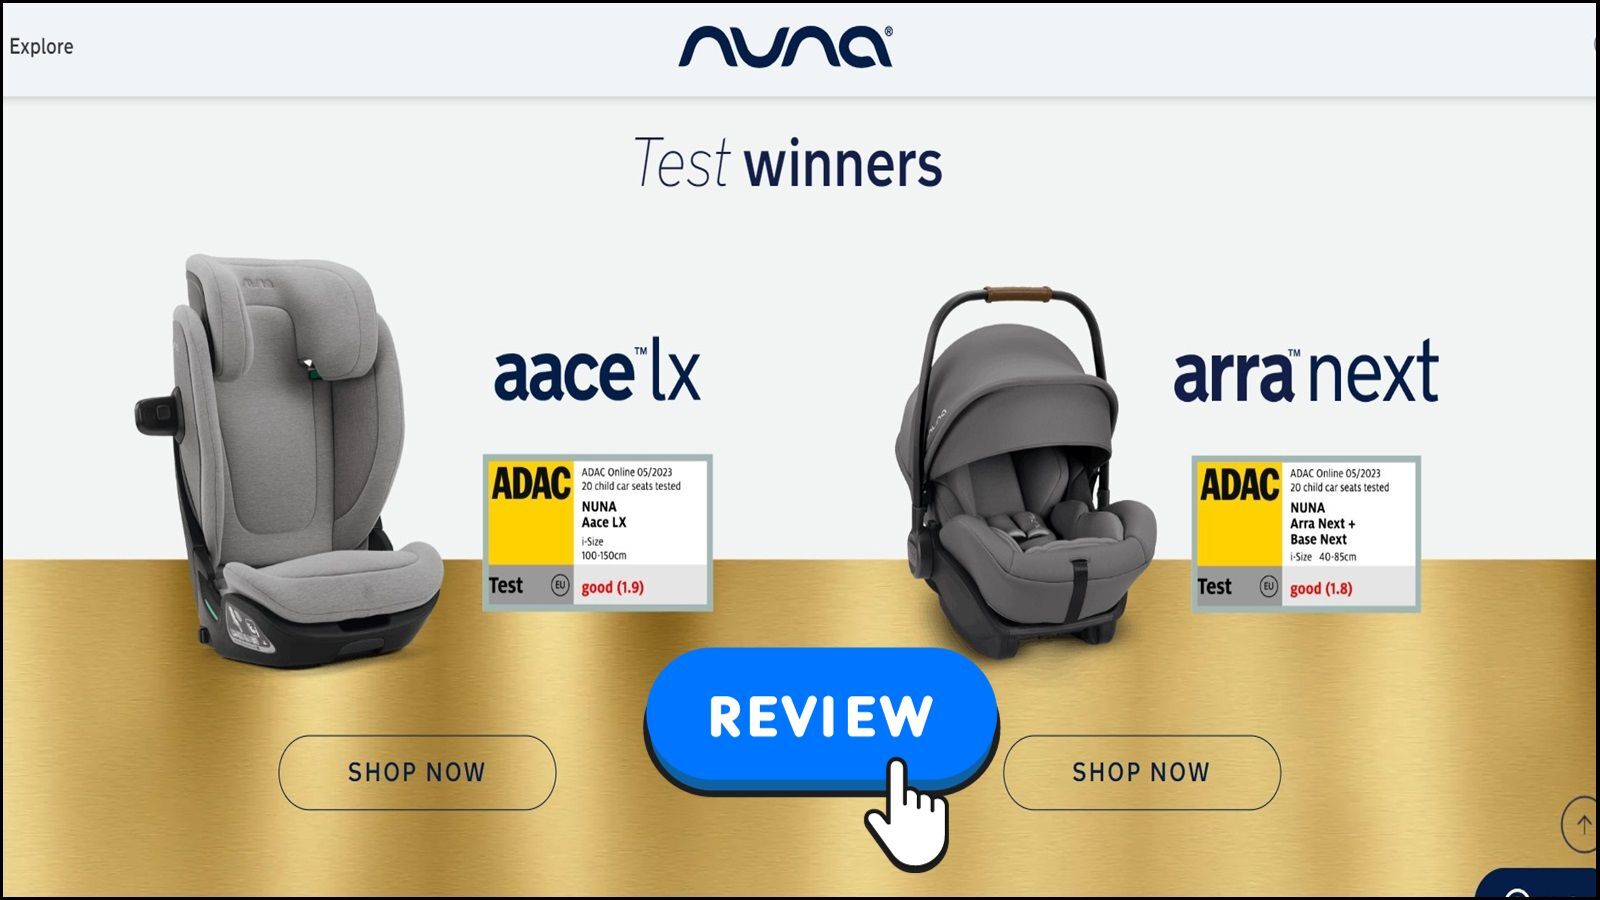 Nuna Car Seat Review: *Pros and Cons* Should You Buy It for Your Baby?